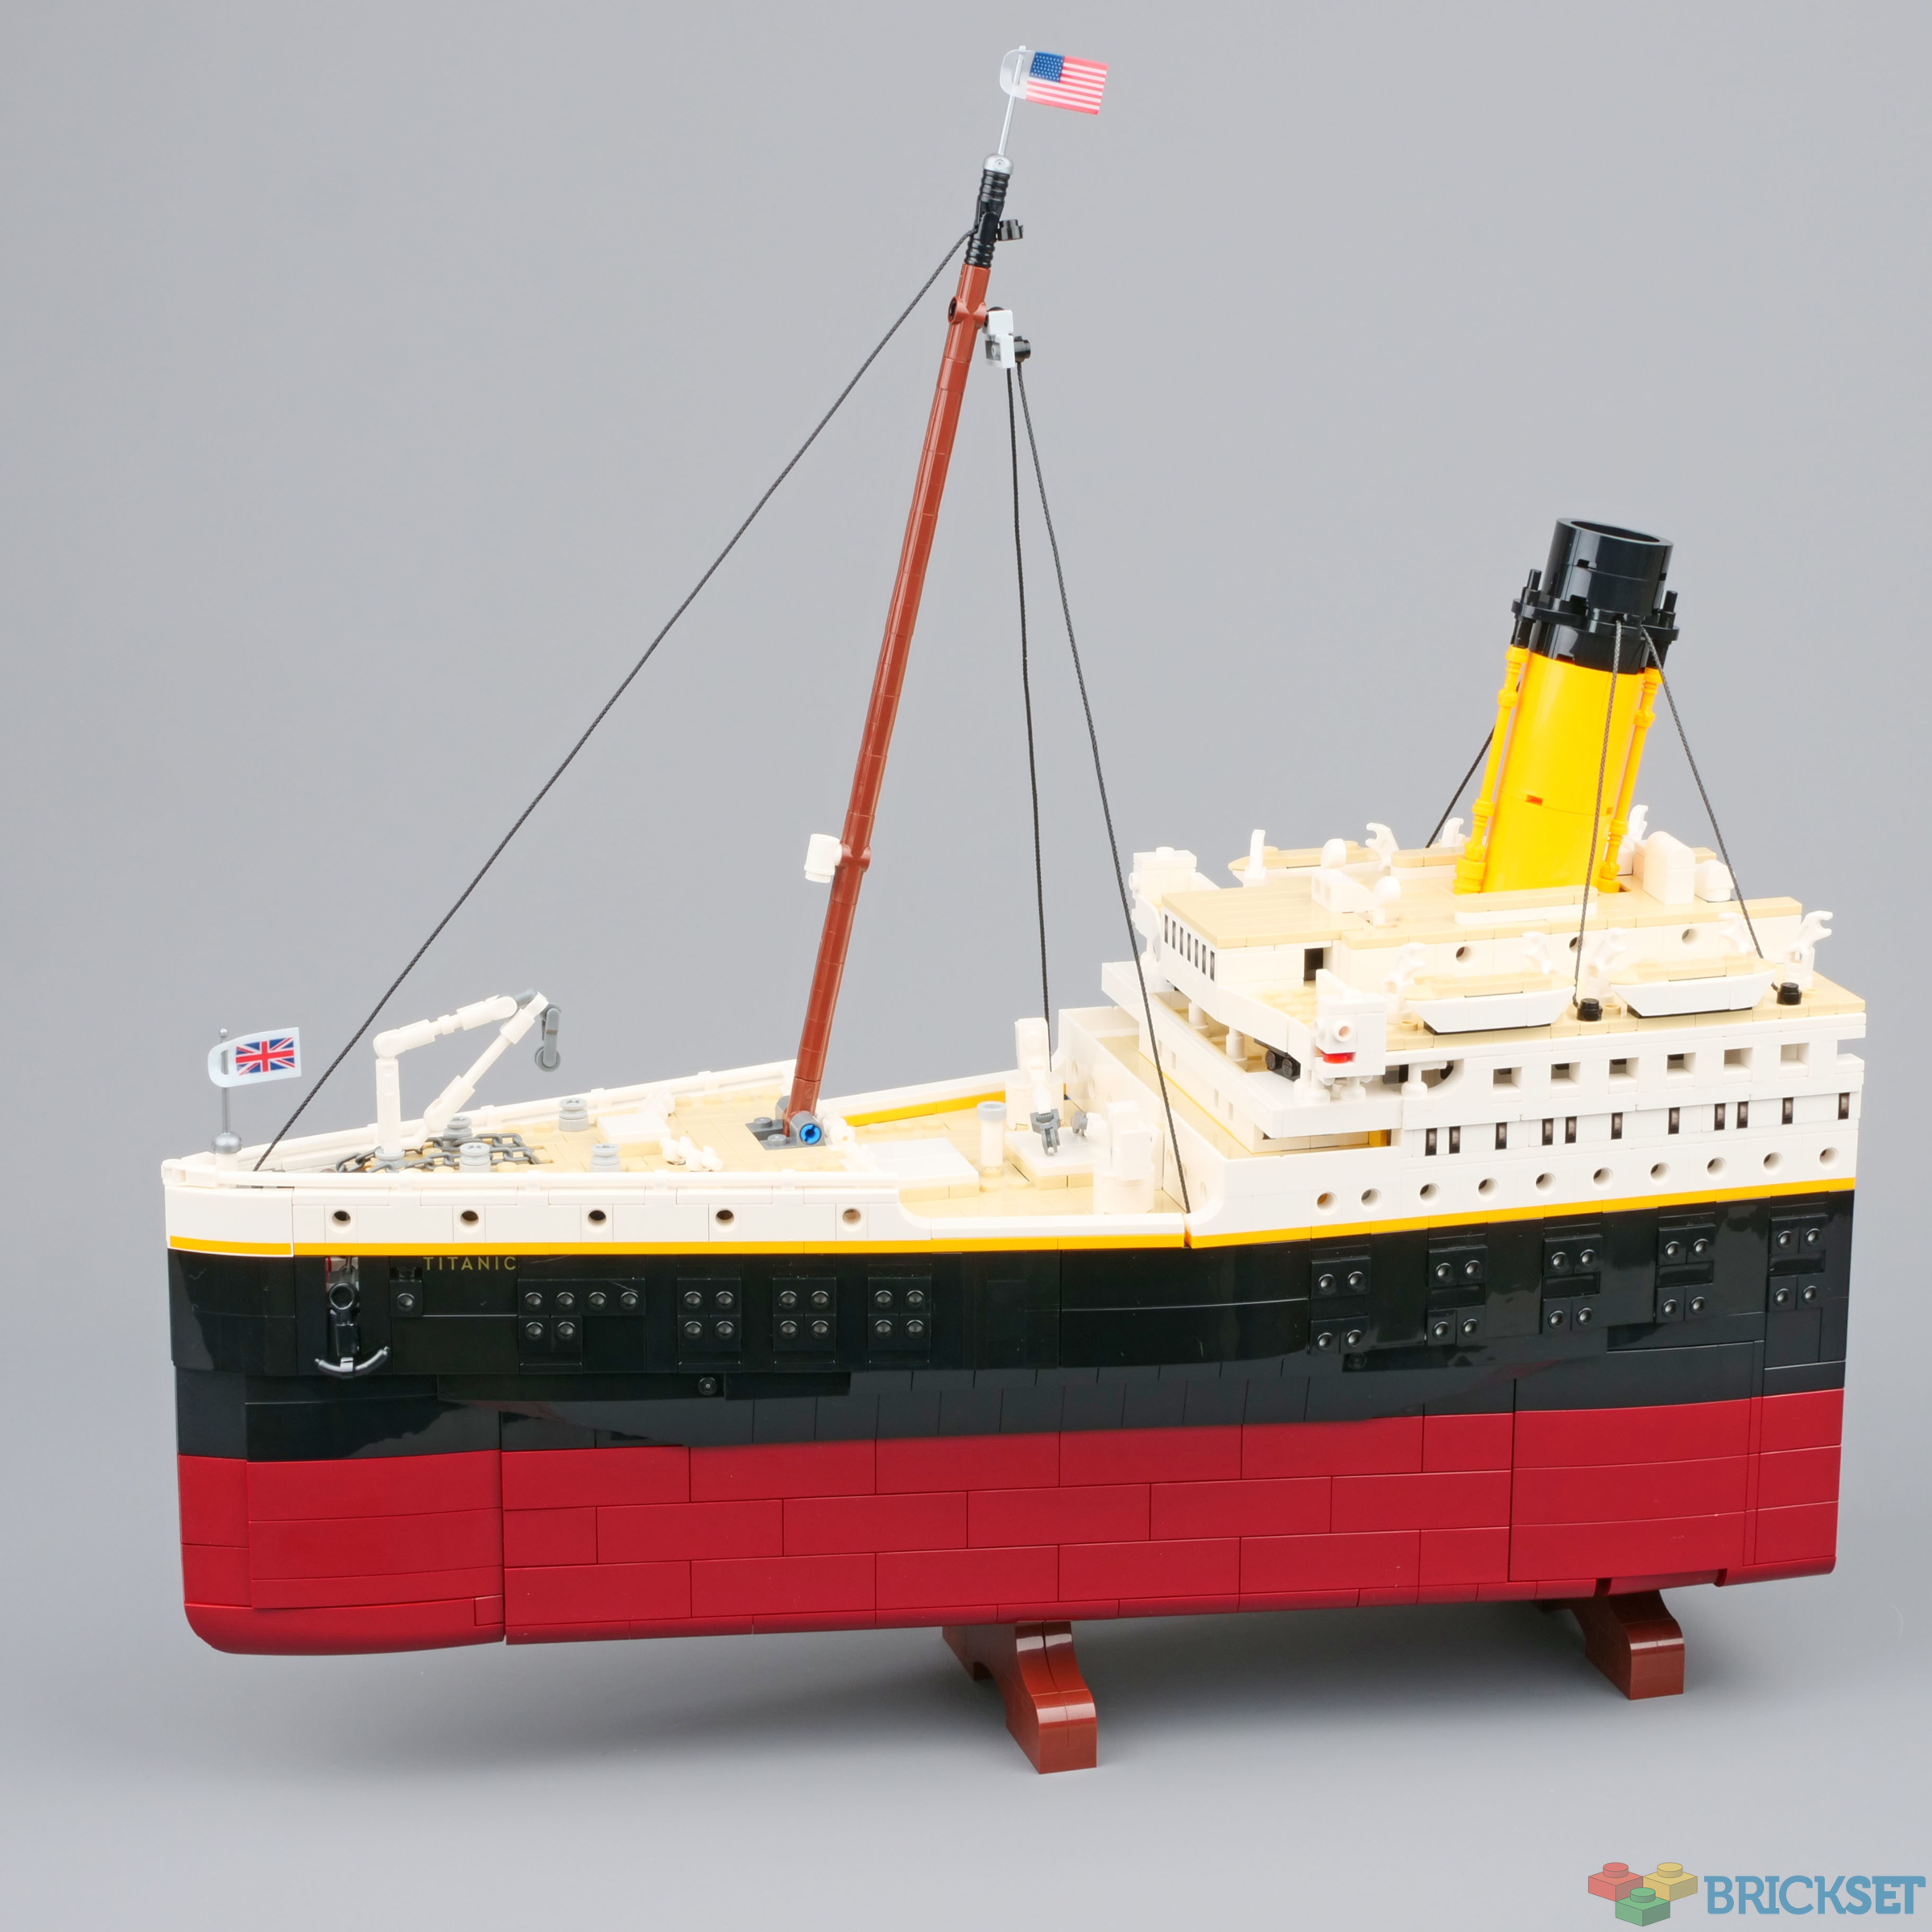 LEGO's new Titanic scale model is its biggest ever set